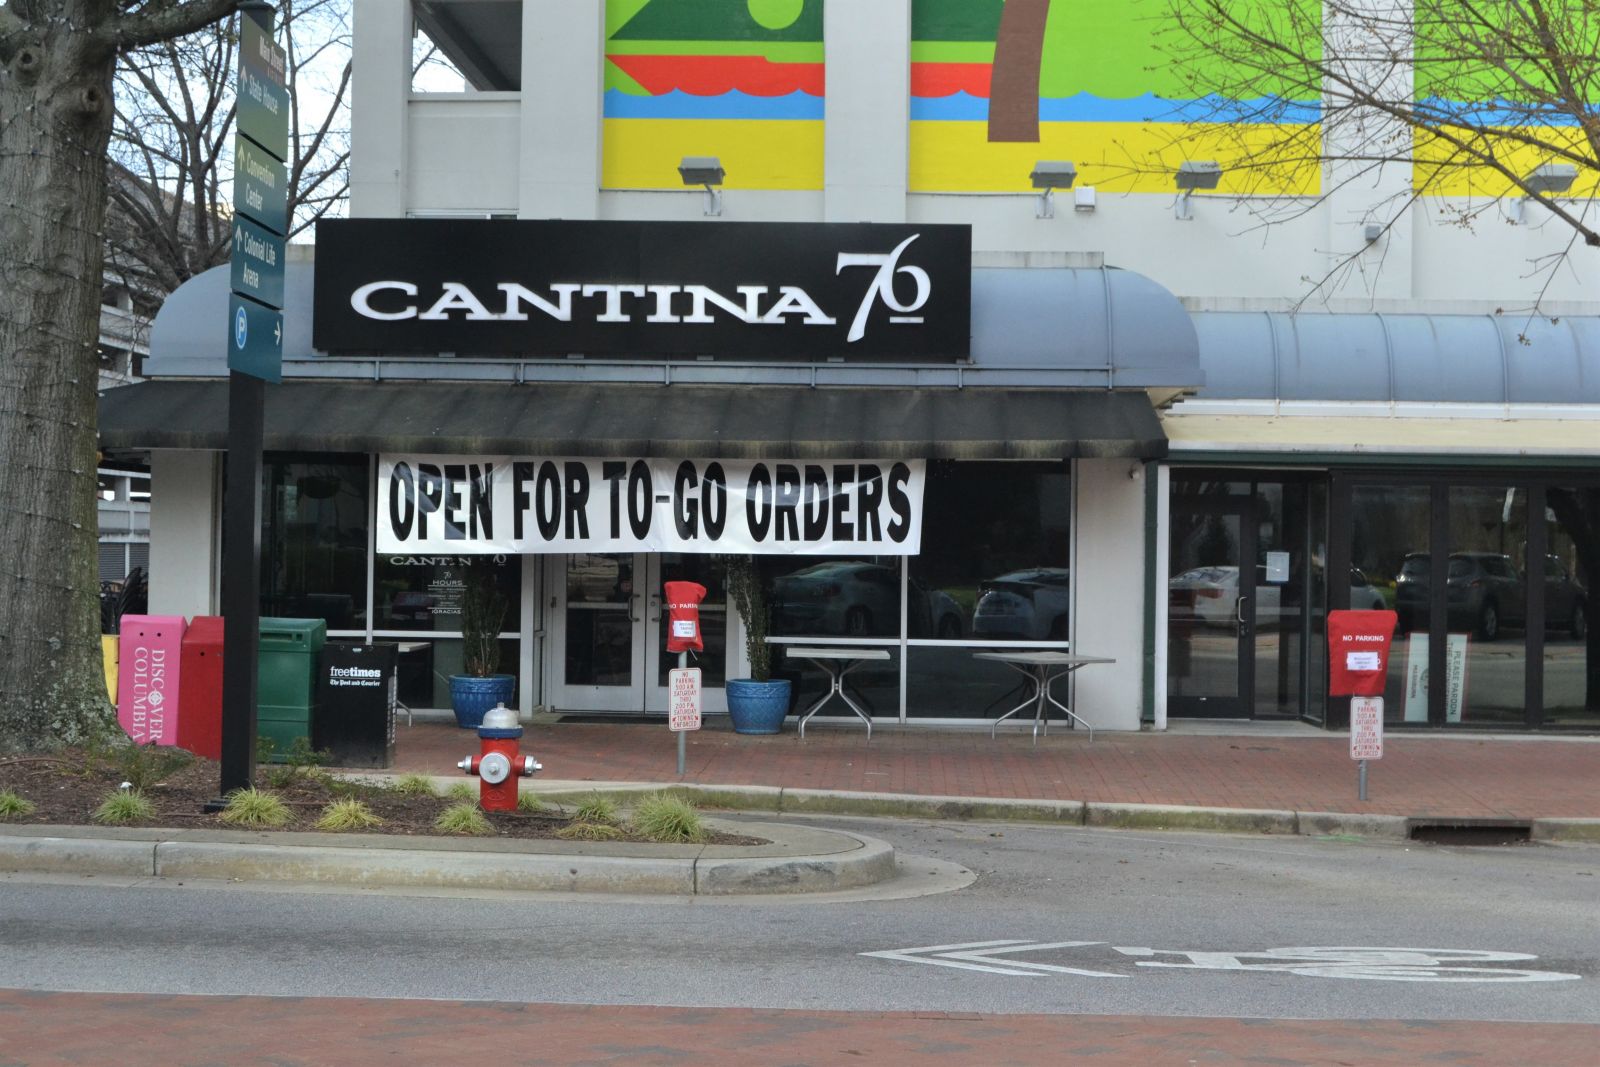 Cantina 76, with two Columbia-area locations, was among S.C. business receiving emergency loans to retain jobs. (Photo/Melinda Waldrop)